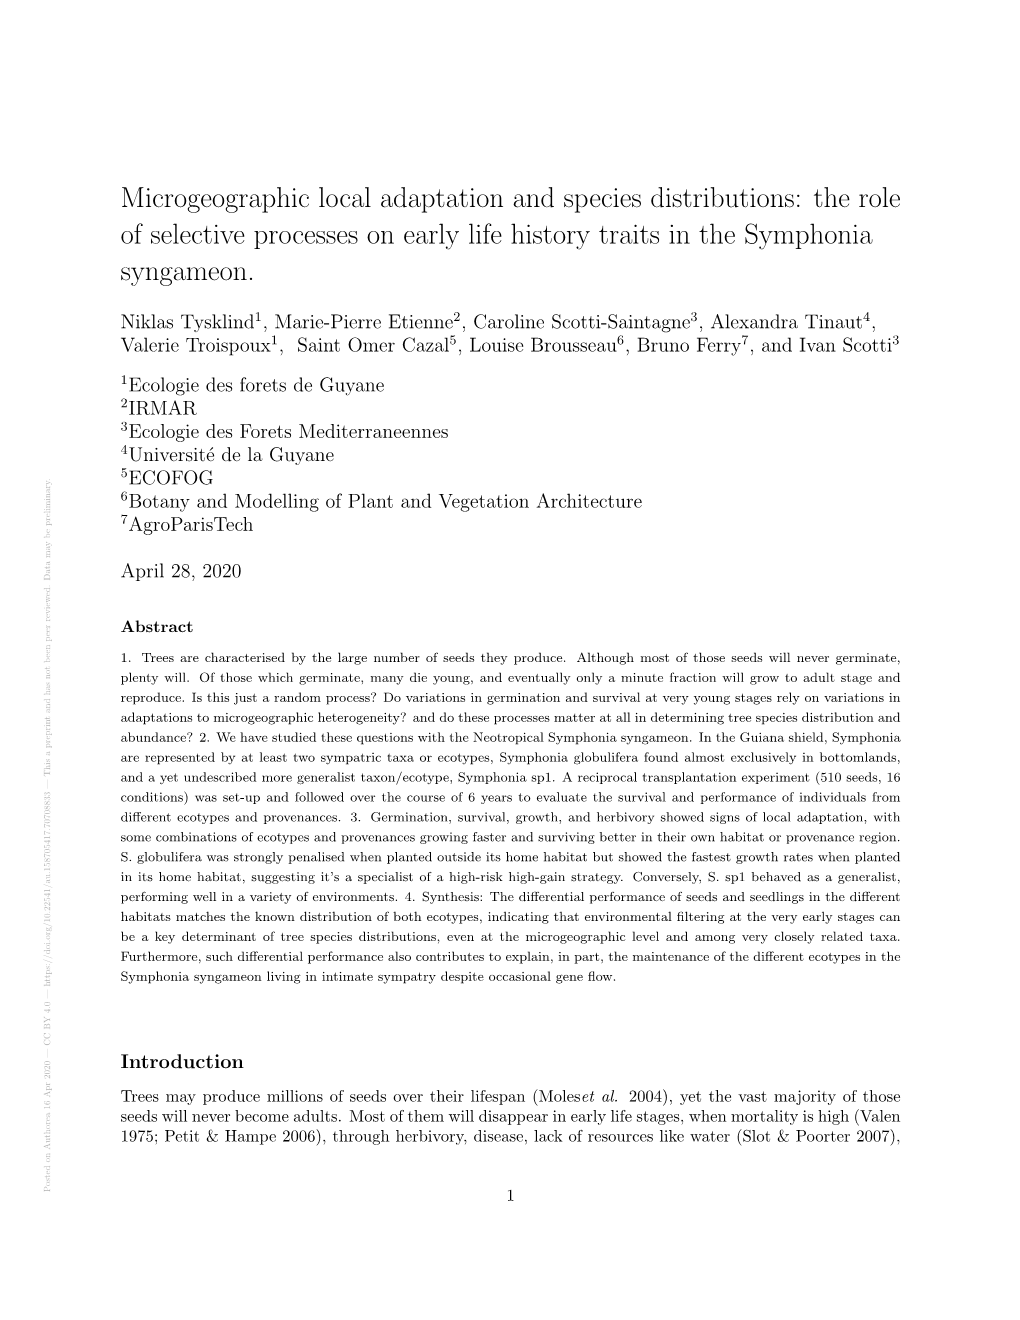 Microgeographic Local Adaptation and Species Distributions: the Role of Selective Processes on Early Life History Traits In